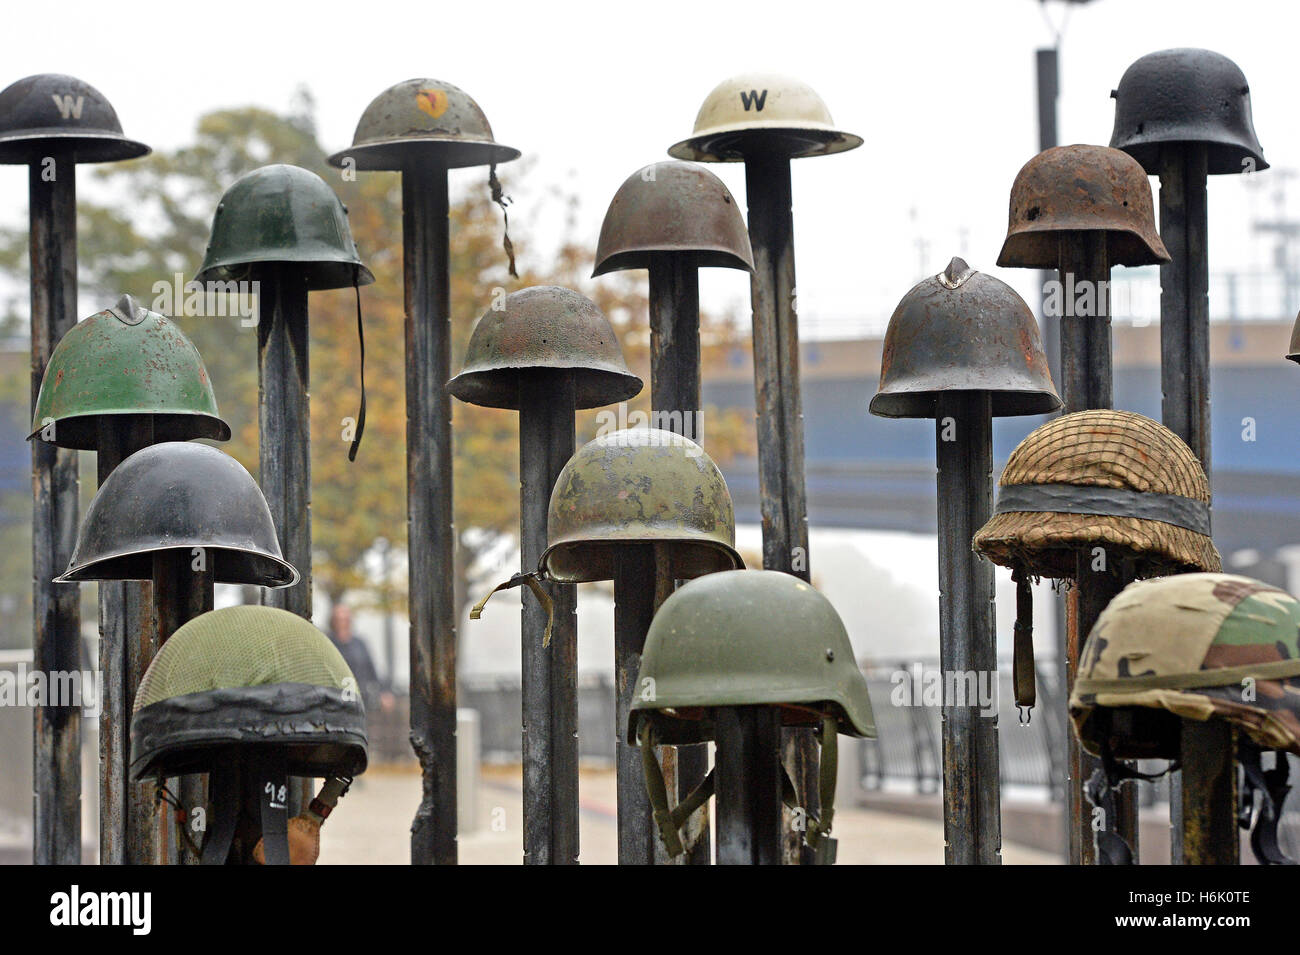 A piece called Lost Soldiers by artist Mark Humphrey, which is part of the UK'¢'s first Remembrance Art Trail, in association with the Royal British Legion and constructed with the help of the Corps of Royal Engineers, consisting of seven art installations in Canary Wharf, London. Stock Photo